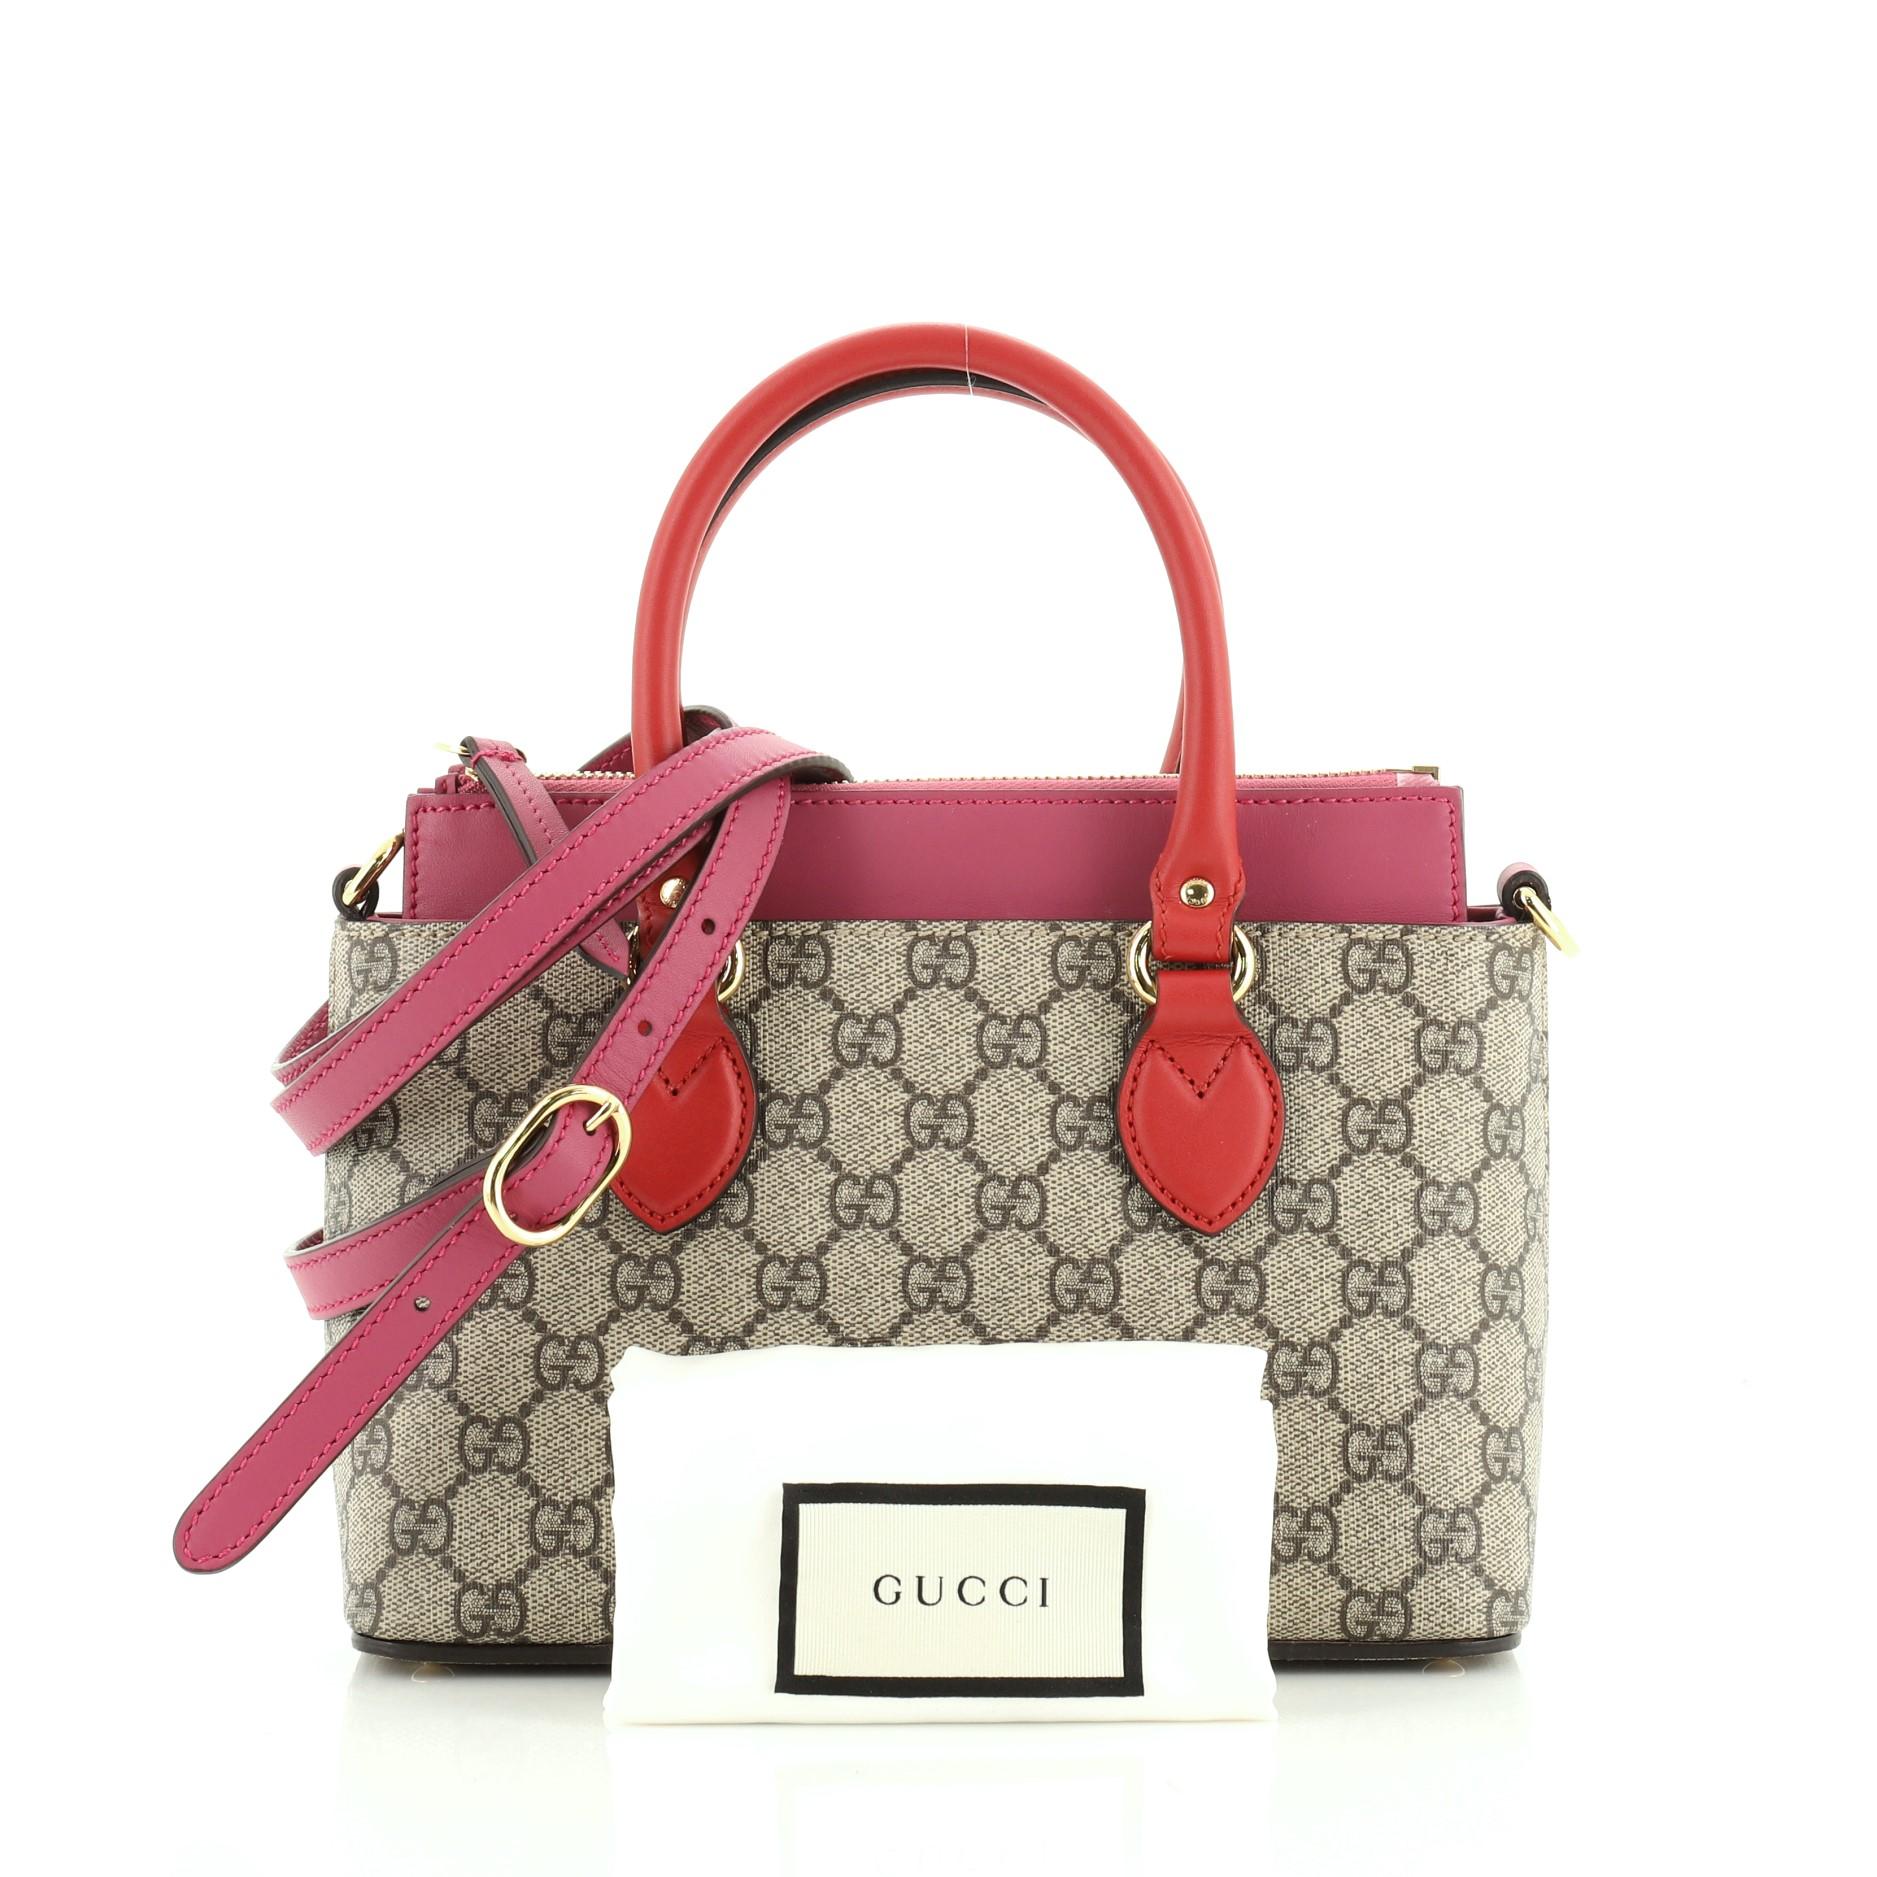 This Gucci Linea A Convertible Tote GG Coated Canvas Mini, crafted in neutral GG coated canvas, features dual rolled leather handles, protective base studs, and gold-tone hardware. Its zip closure opens to a neutral microfiber interior with slip